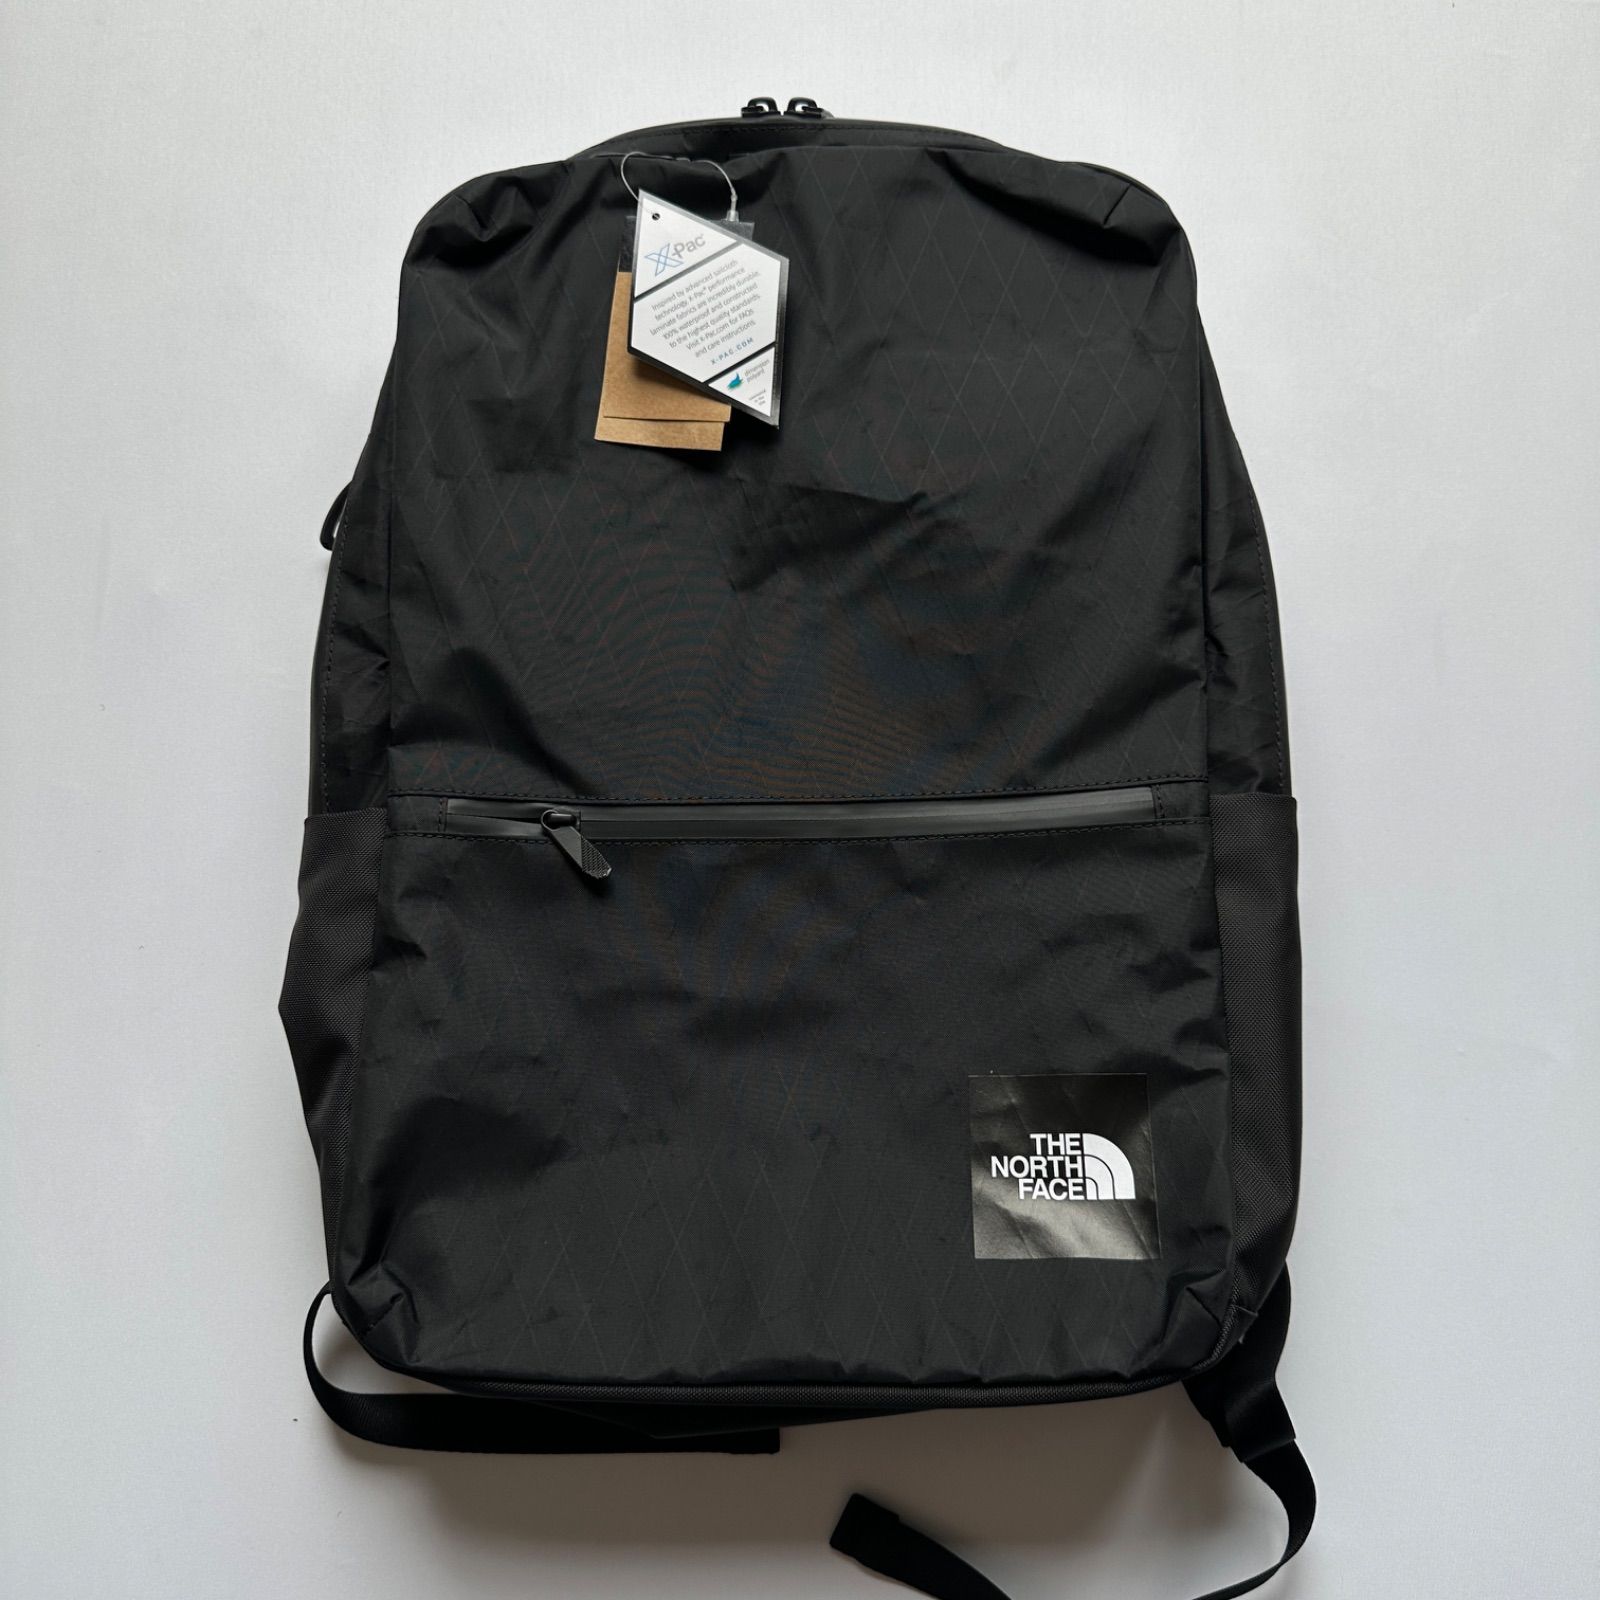 THE NORTH FACE/NEW URBAN BACKPACK X-PAC アーバンバックパック 